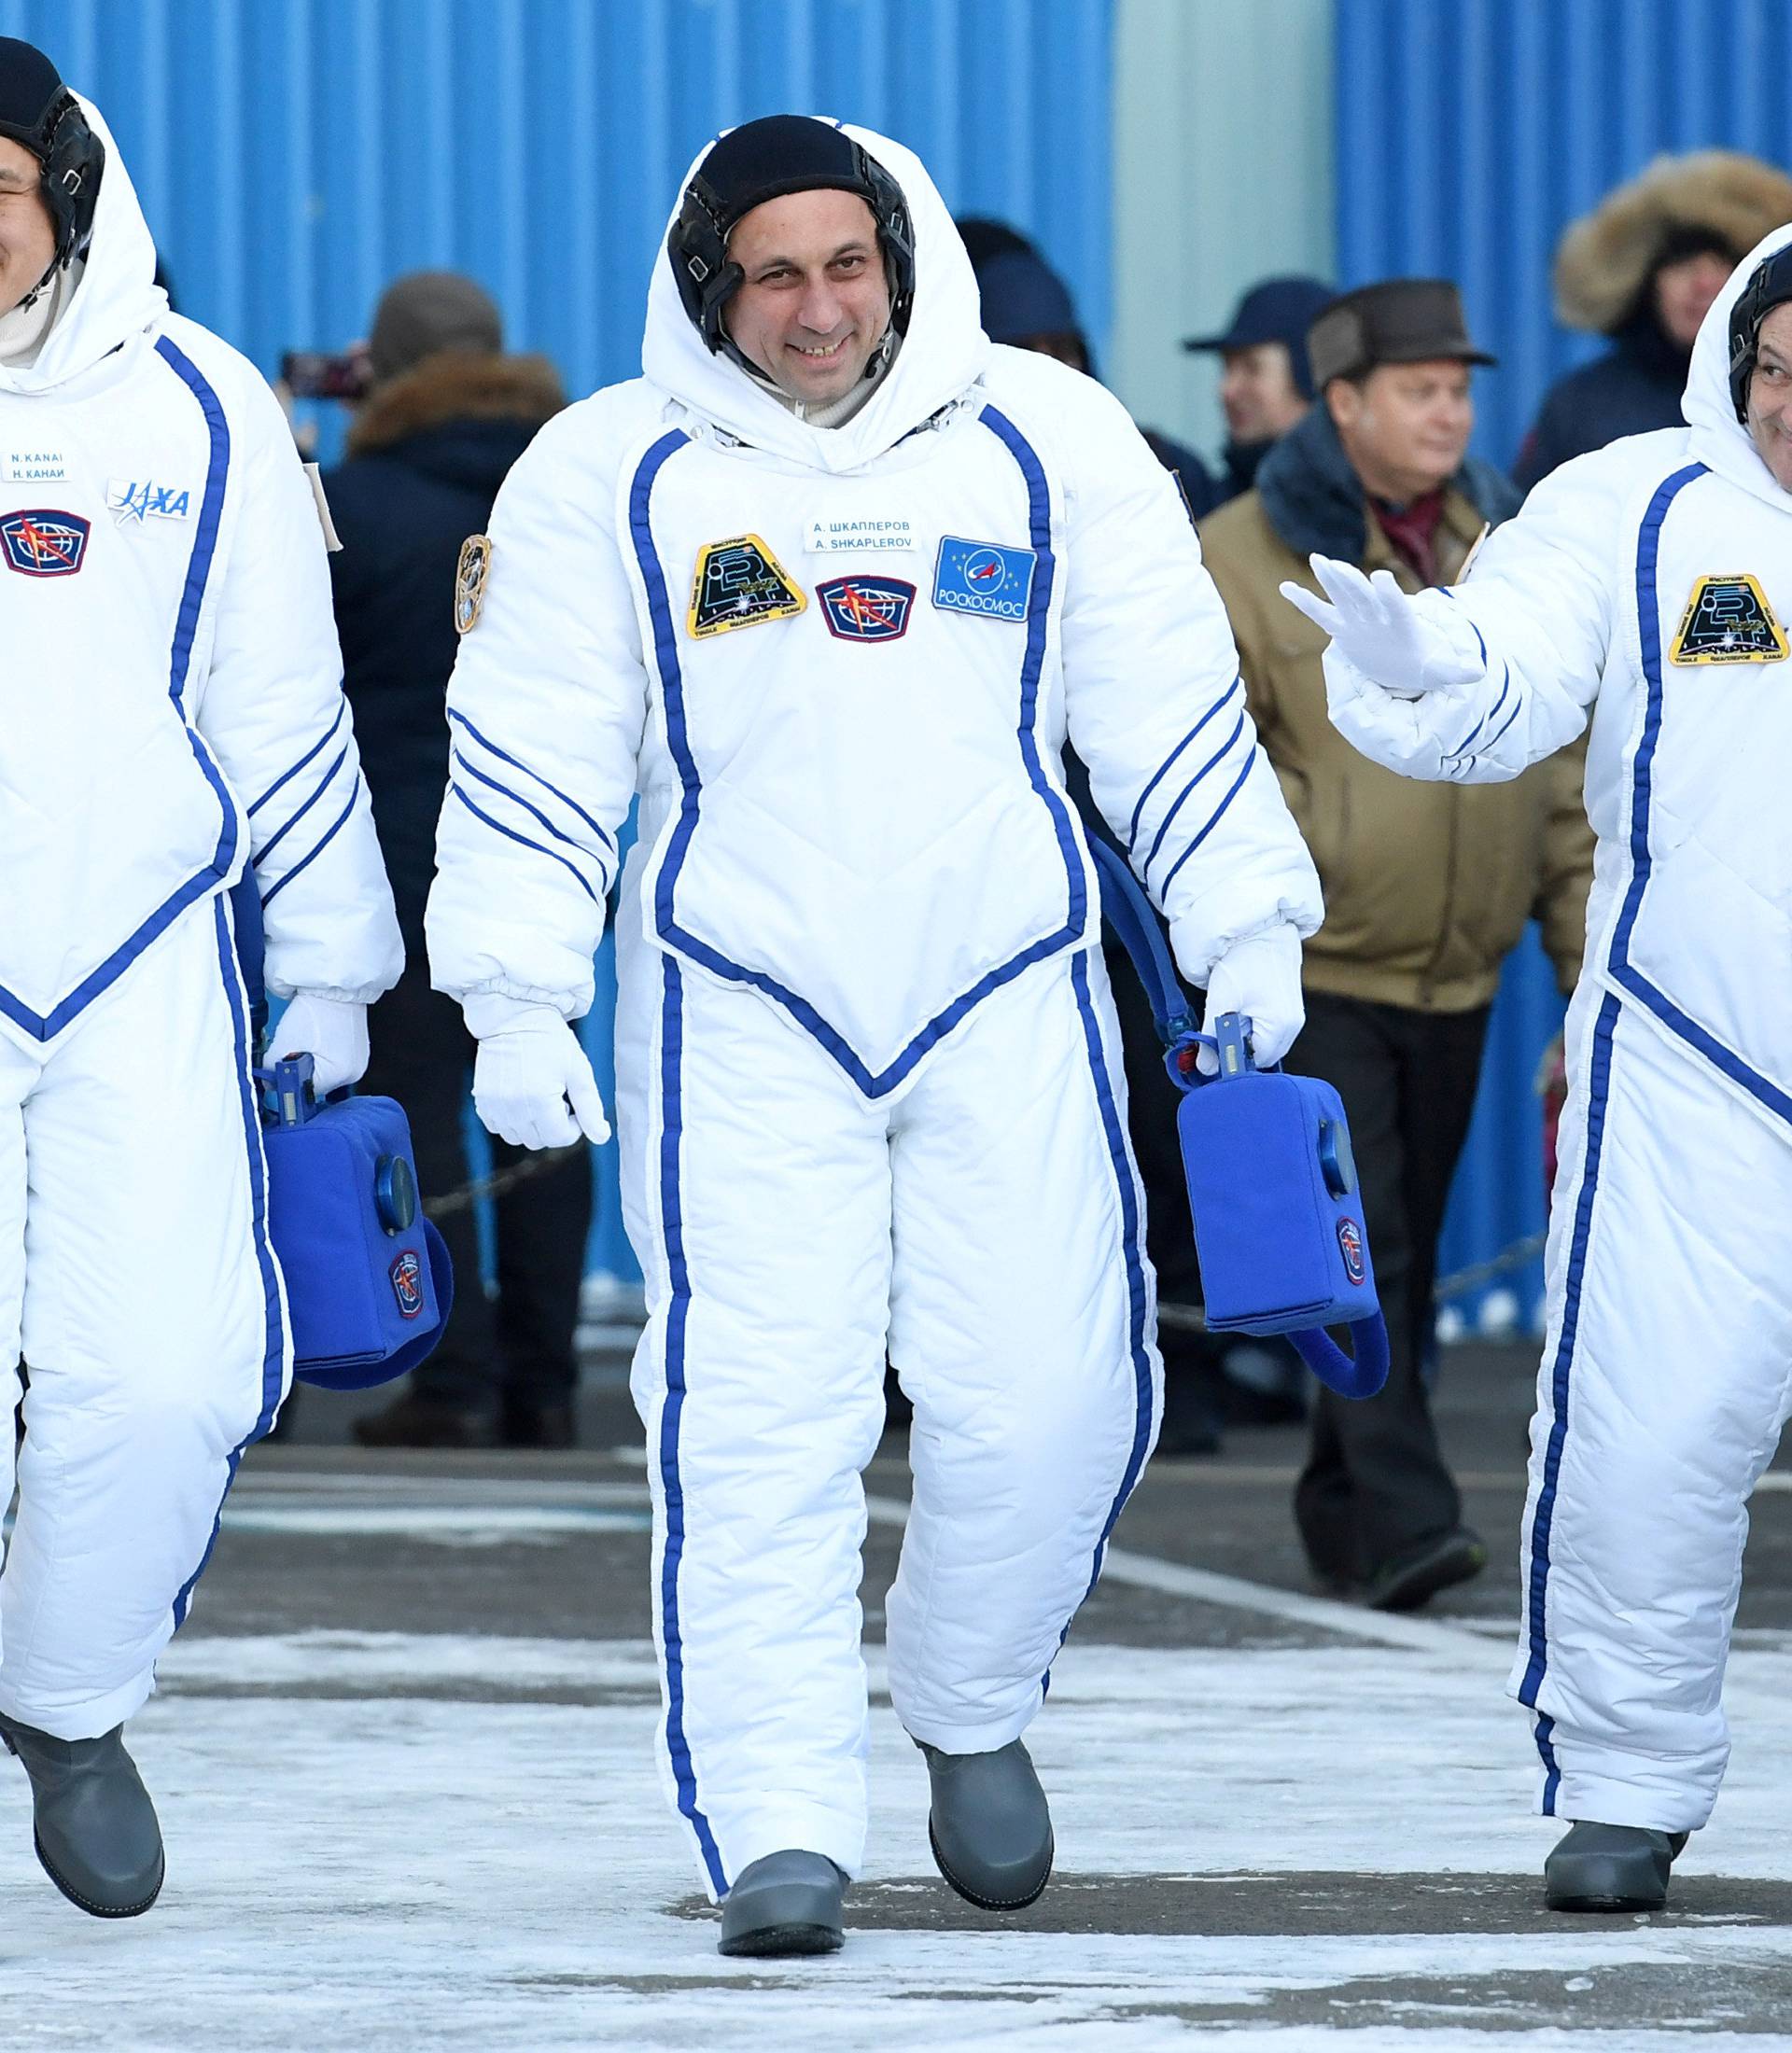 Members of the International Space Station expedition 54/55 during the send-off ceremony after checking their space suits before the launch of the Soyuz MS-07 spacecraft at the Baikonur cosmodrome